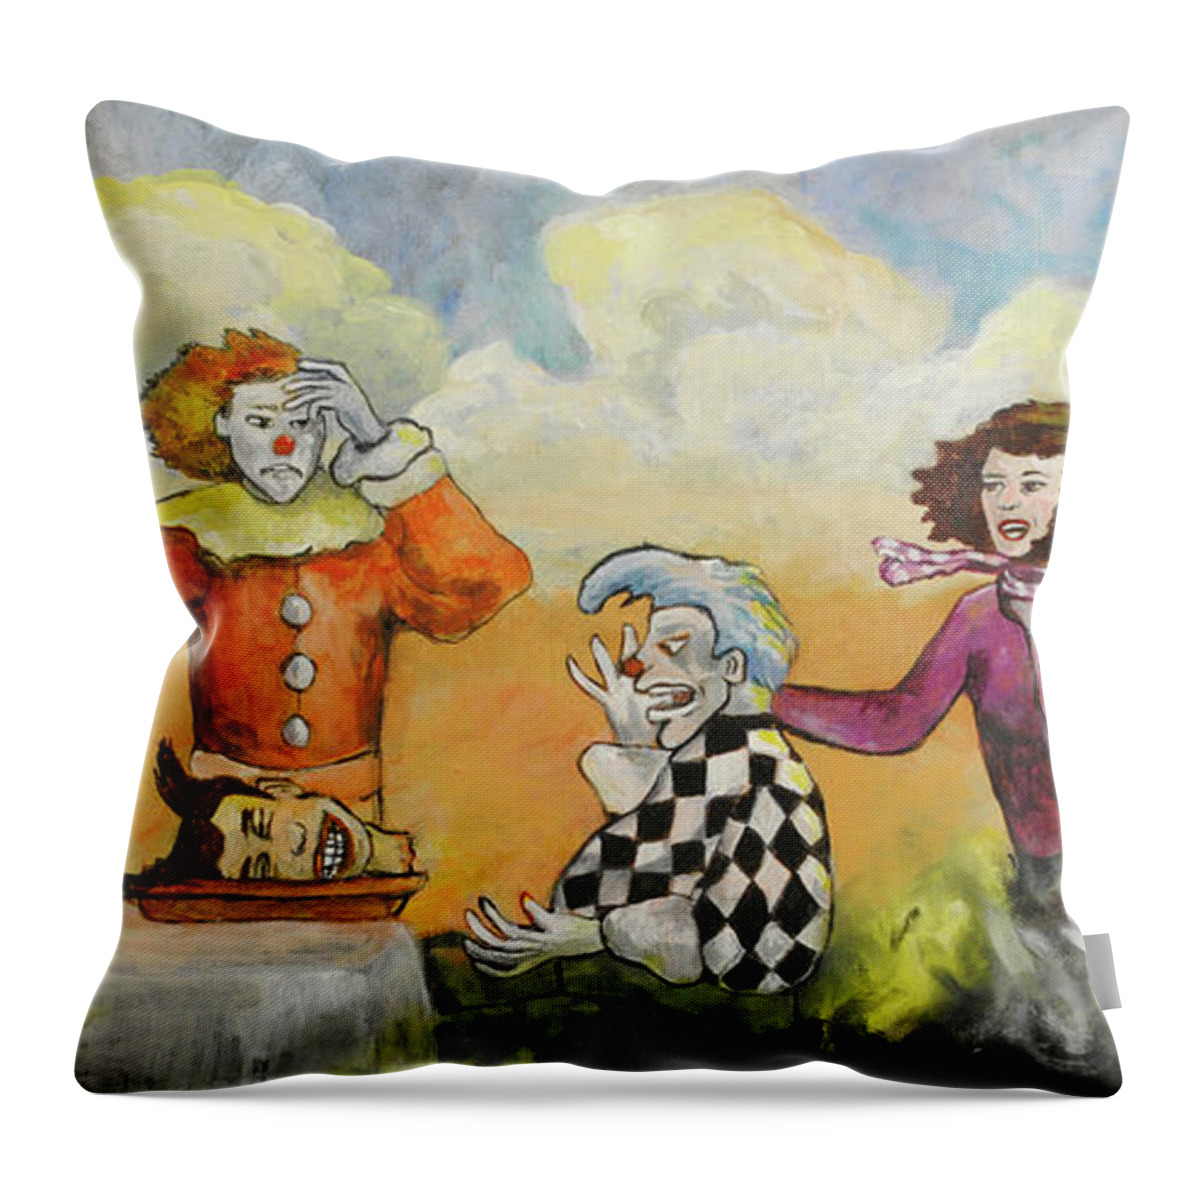 Nightmares Throw Pillow featuring the painting The Final Separation by Patricia Arroyo